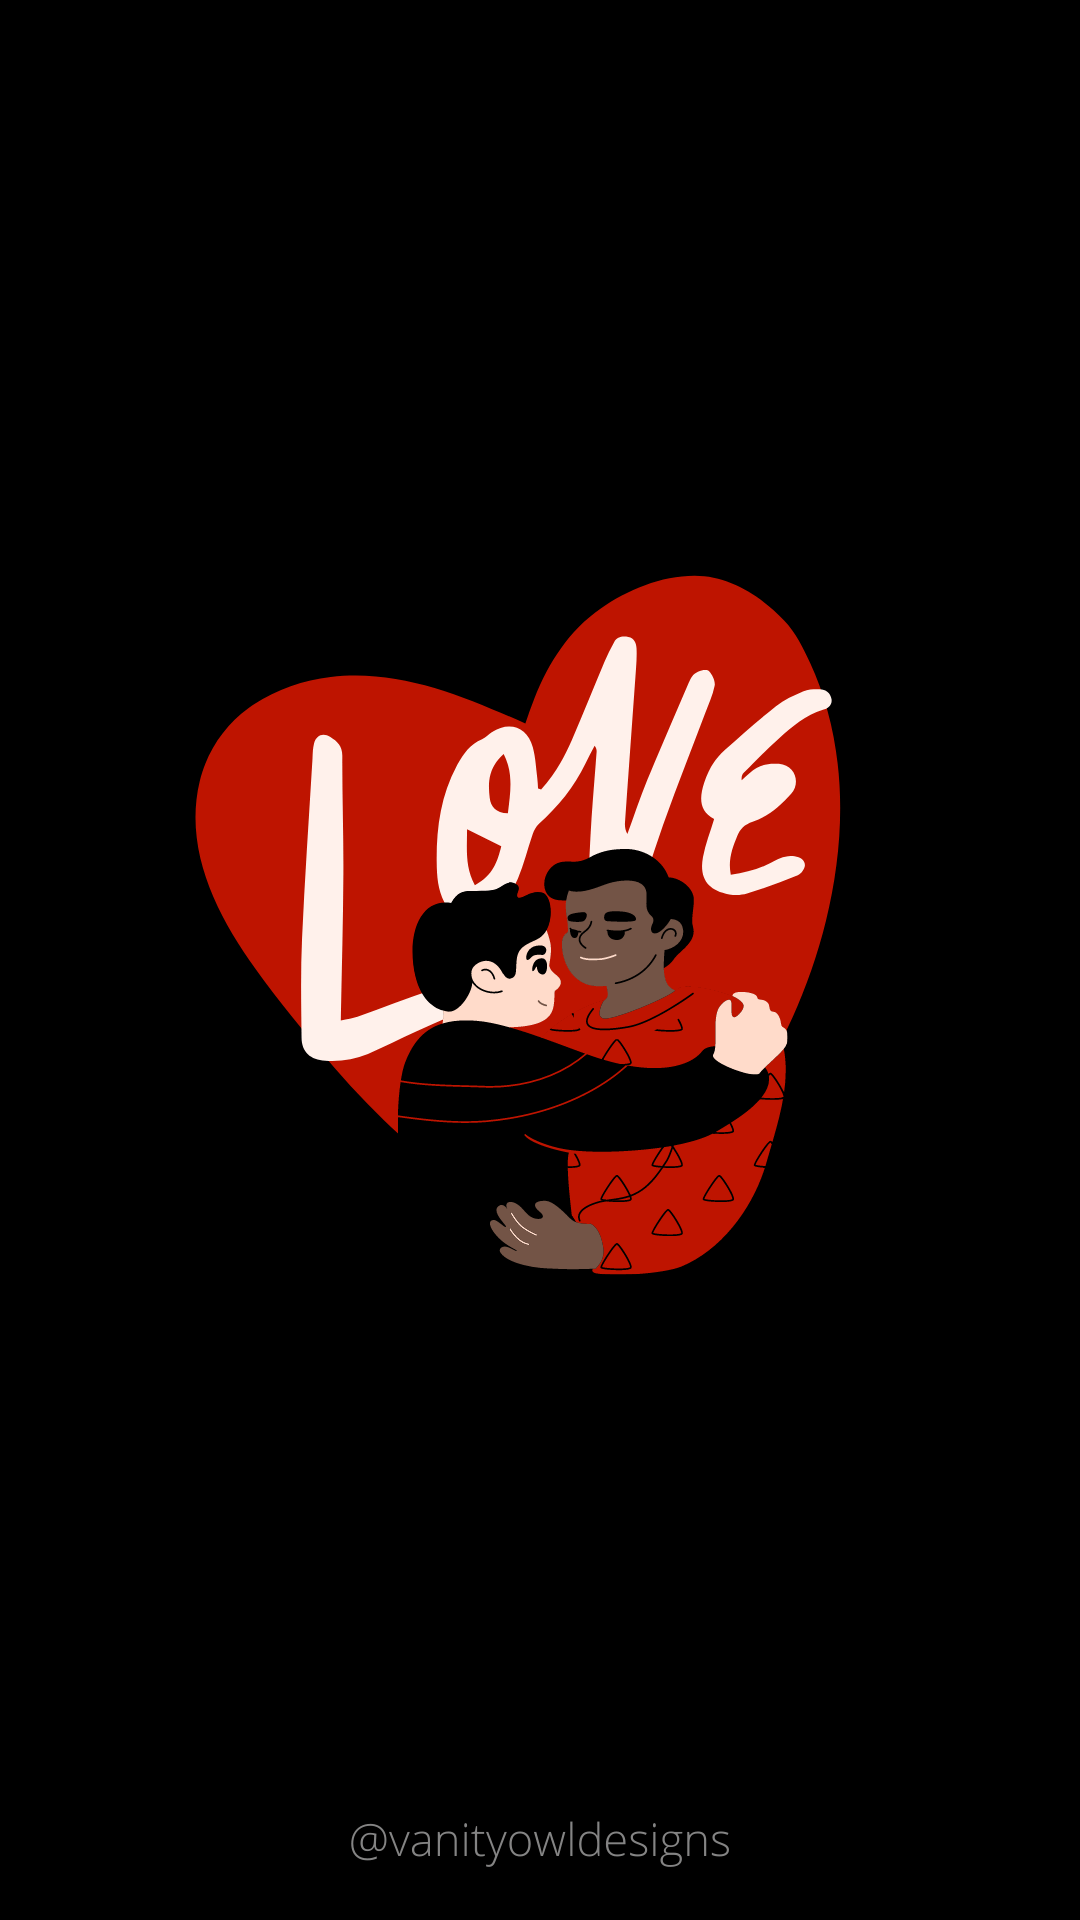 A black and red graphic with the word love on it - Valentine's Day